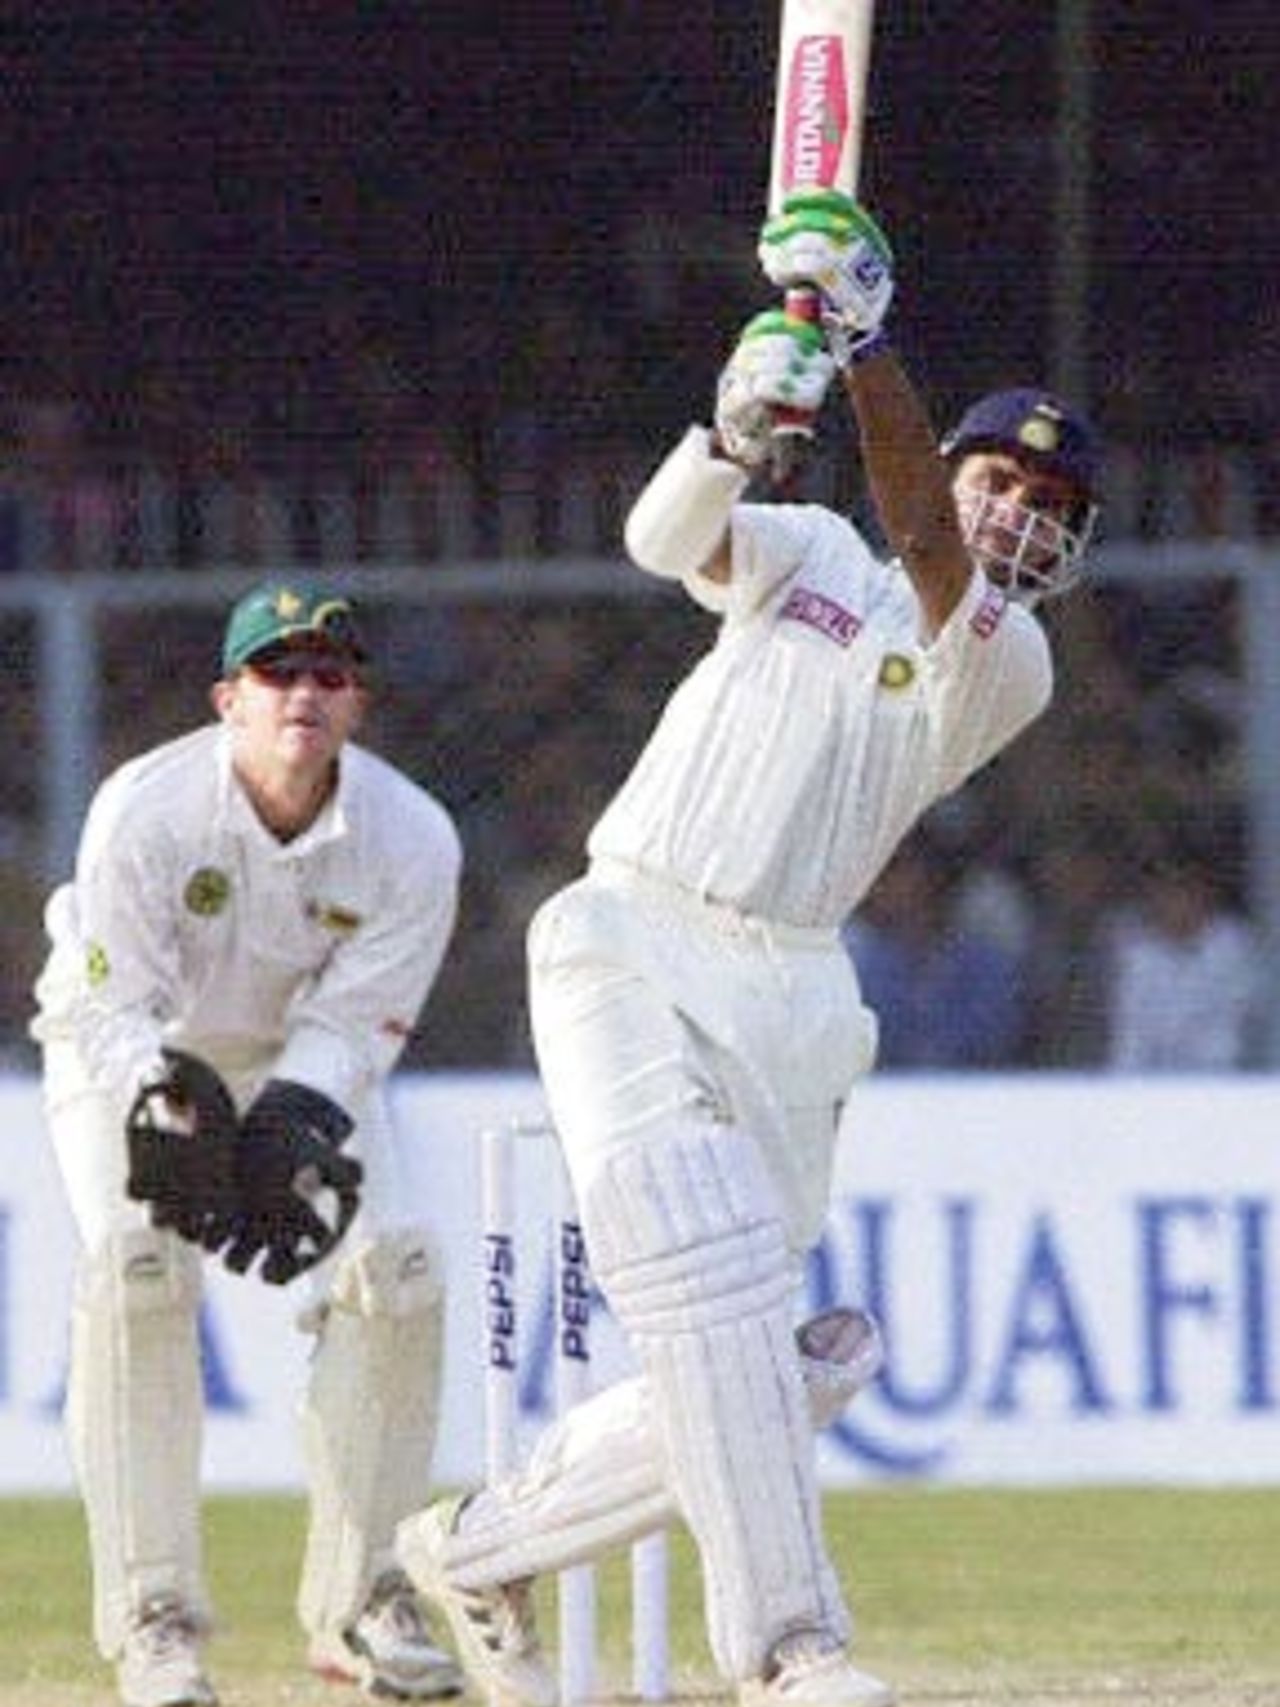 Indian skipper Sourav Ganguly hits a six off Zimbabwean spinner Bryan Murphy (not in picture) as Zimbabwe wicketkeeper Andy Flower looks on during the fourth one-day cricket match at Green Park in Kanpur, 11 December 2000. Ganguly claimed a career-best 5-35 and an unbeaten 71 off 68 balls as India beat Zimbabwe by nine wickets to win the one-day series. Ganguly was named man of the match.